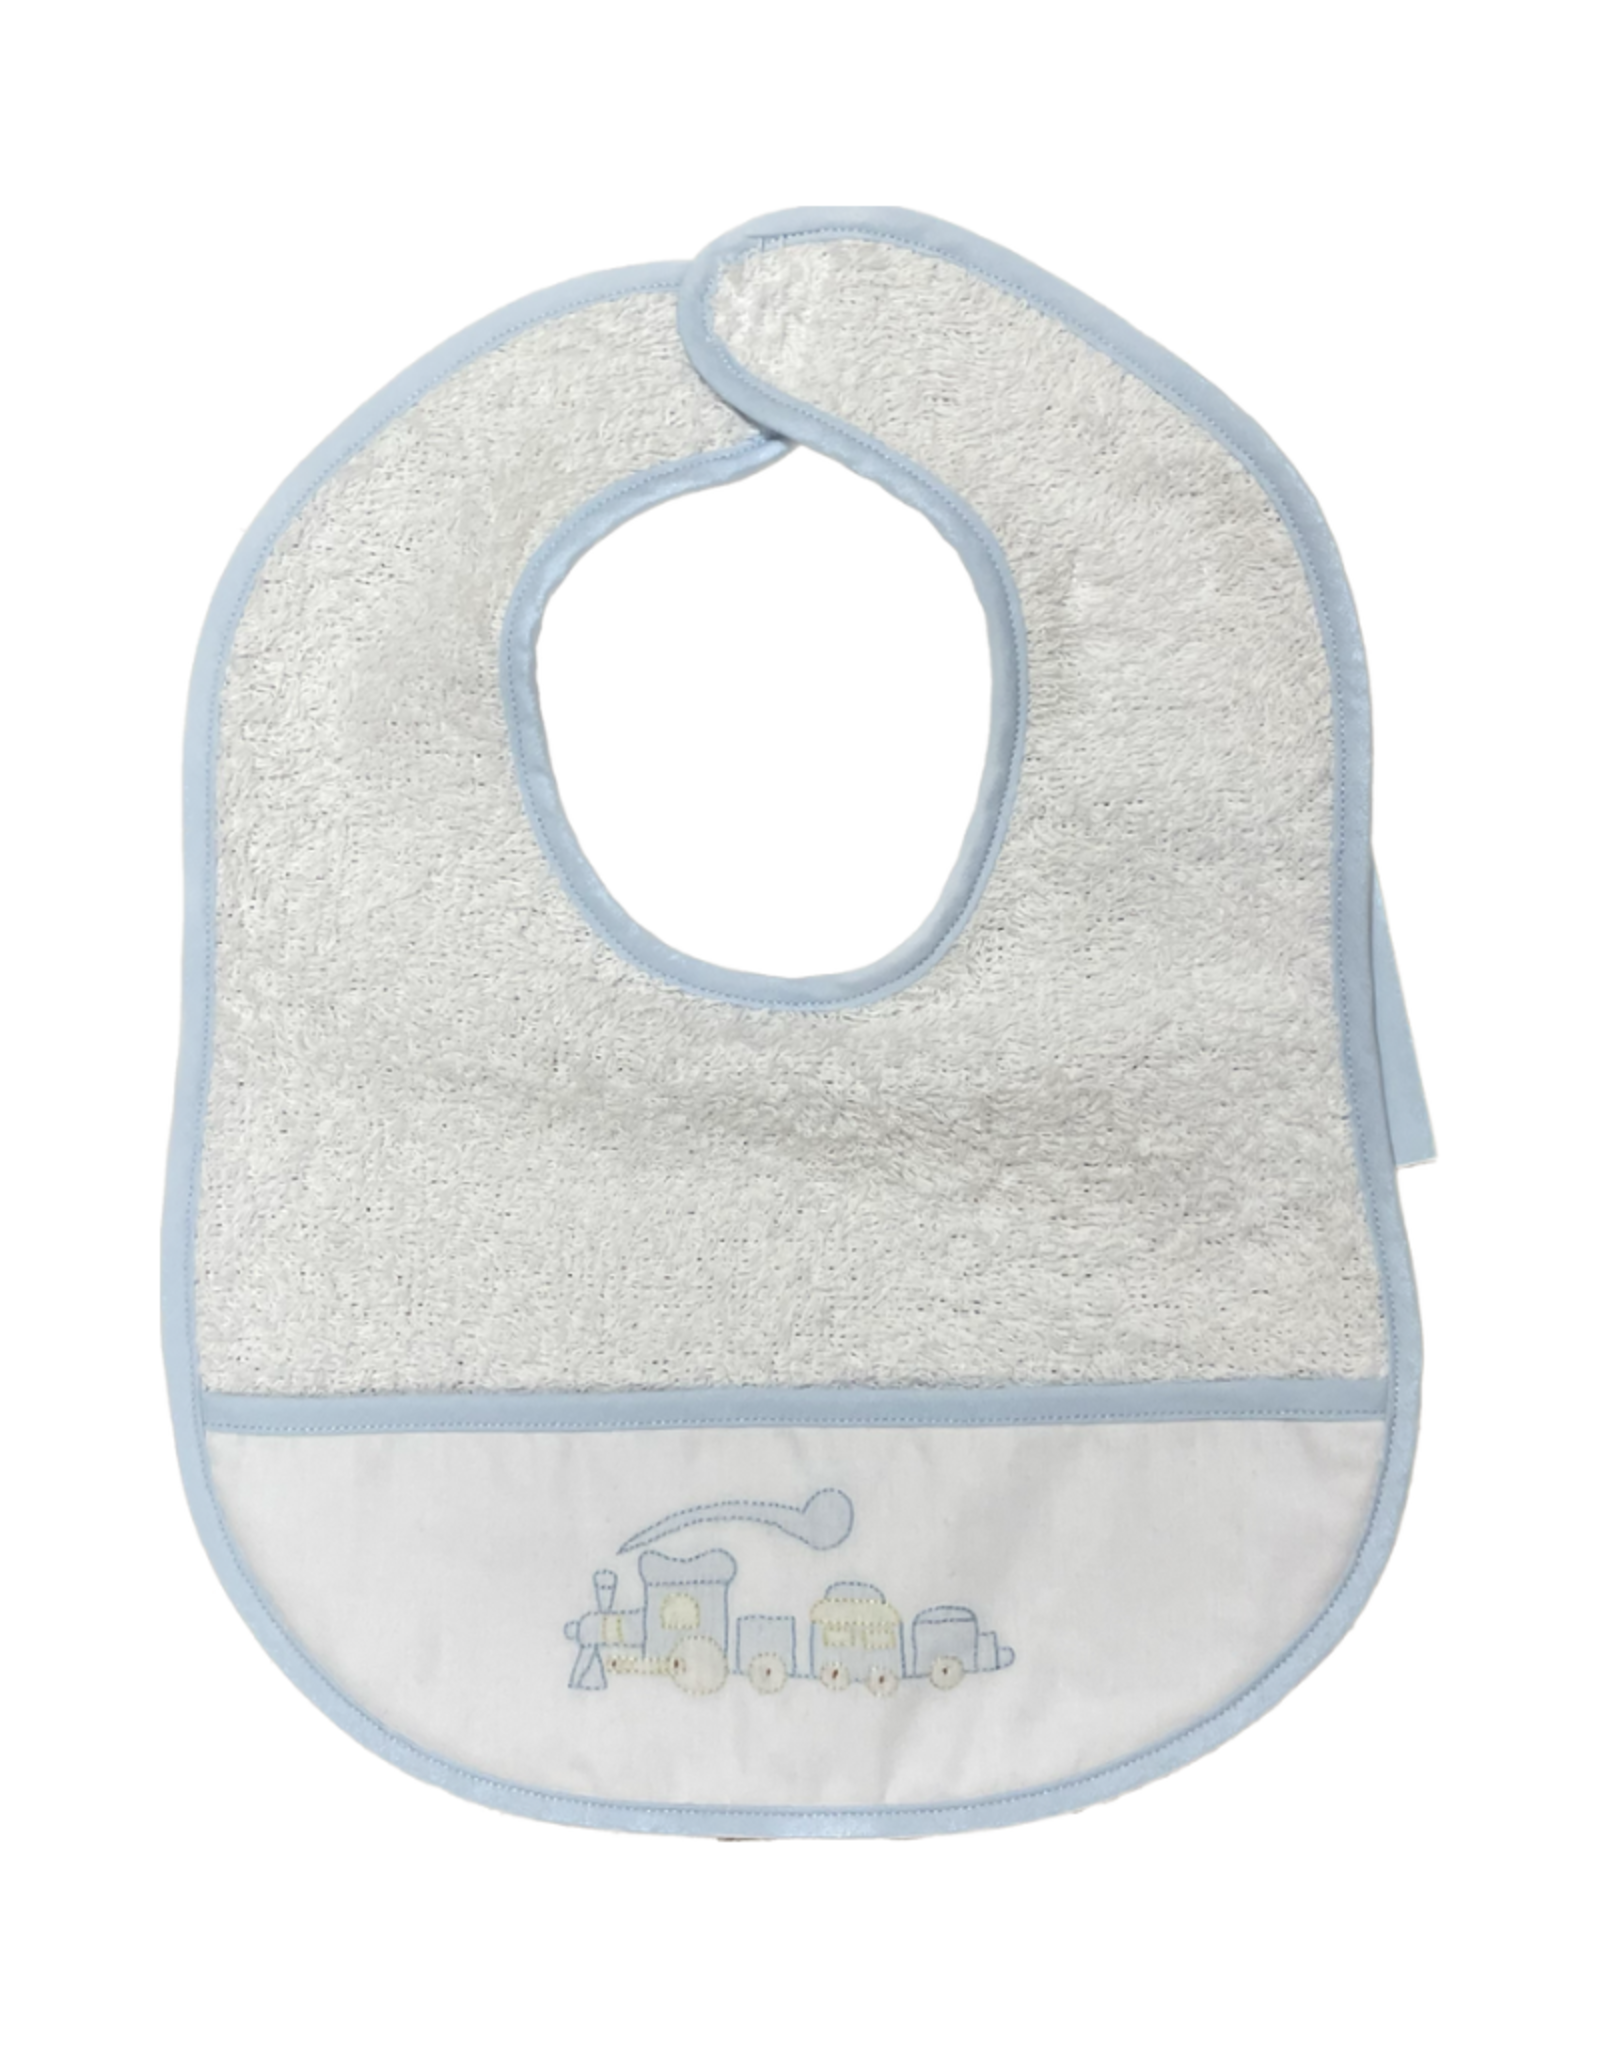 Auraluz Terry Cloth Bib with Train Embroidery